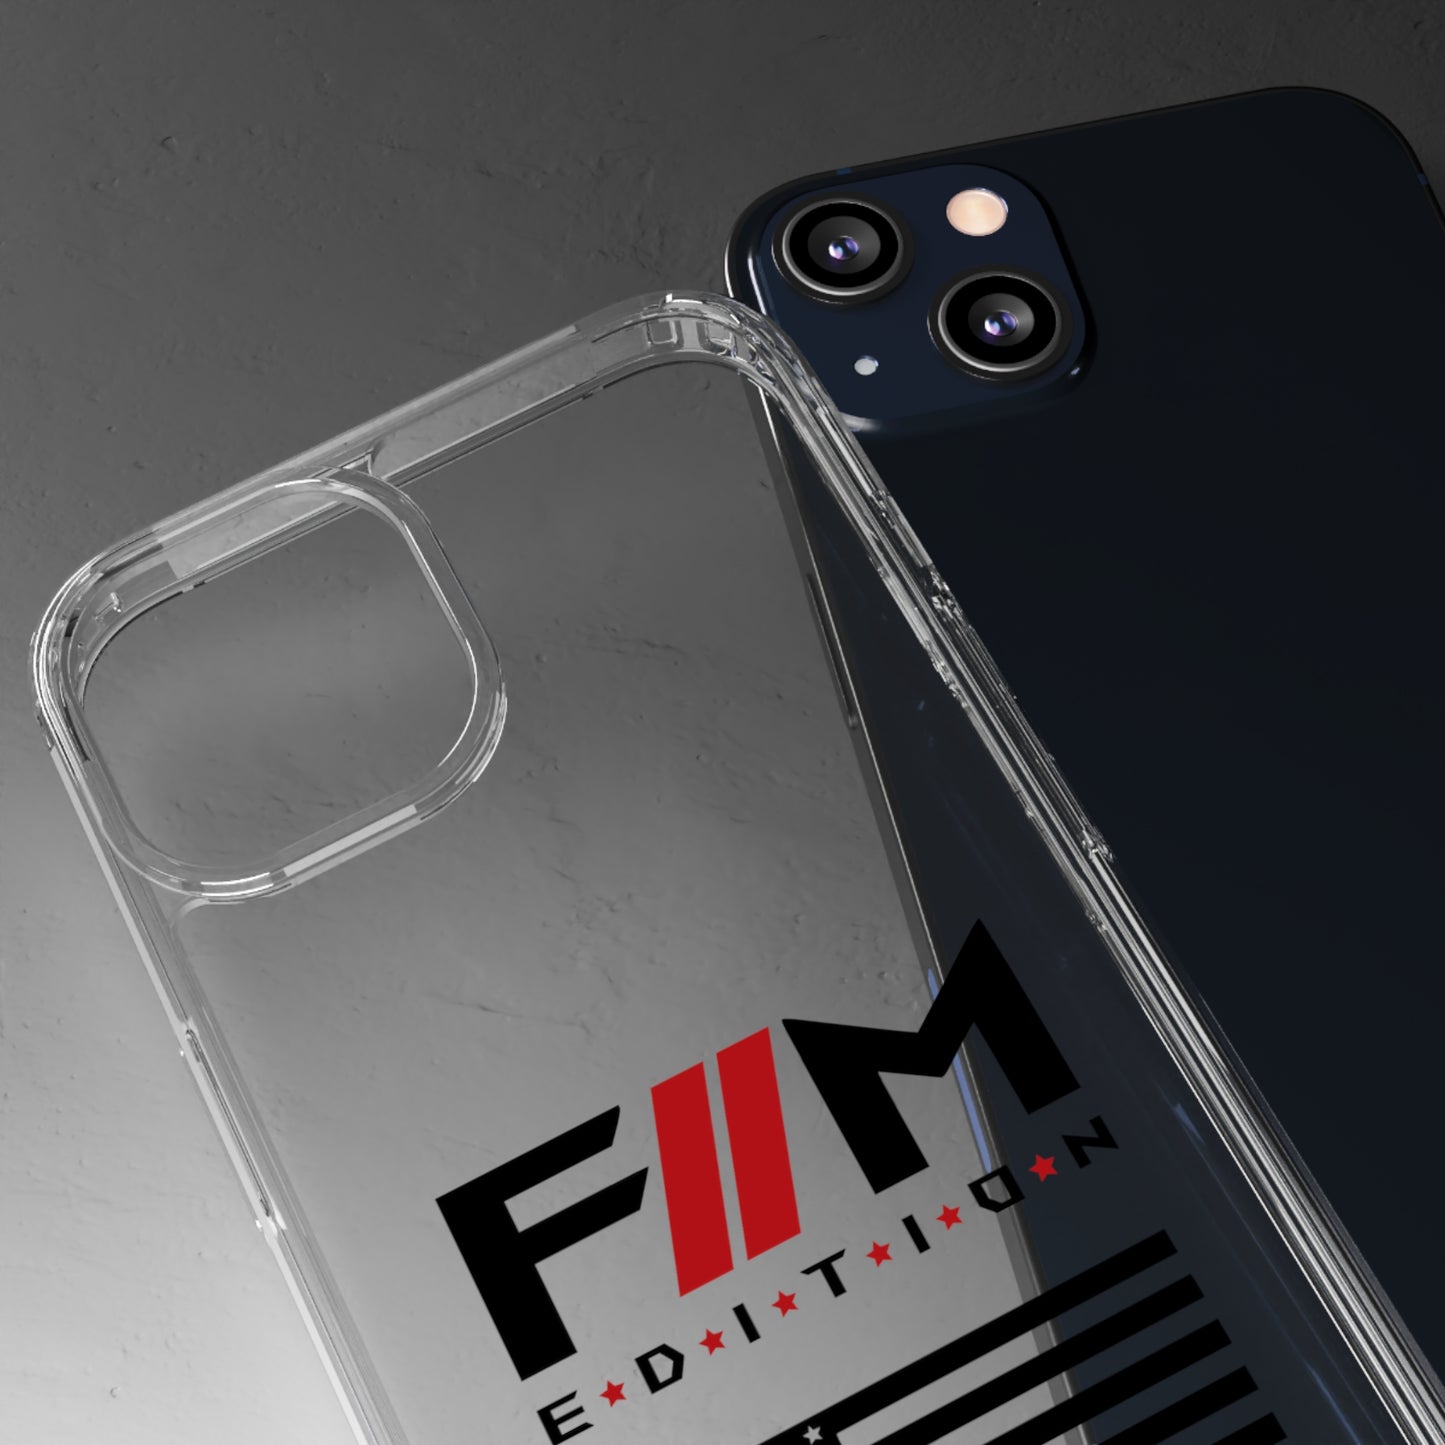 FM Edition Clear Phone Case